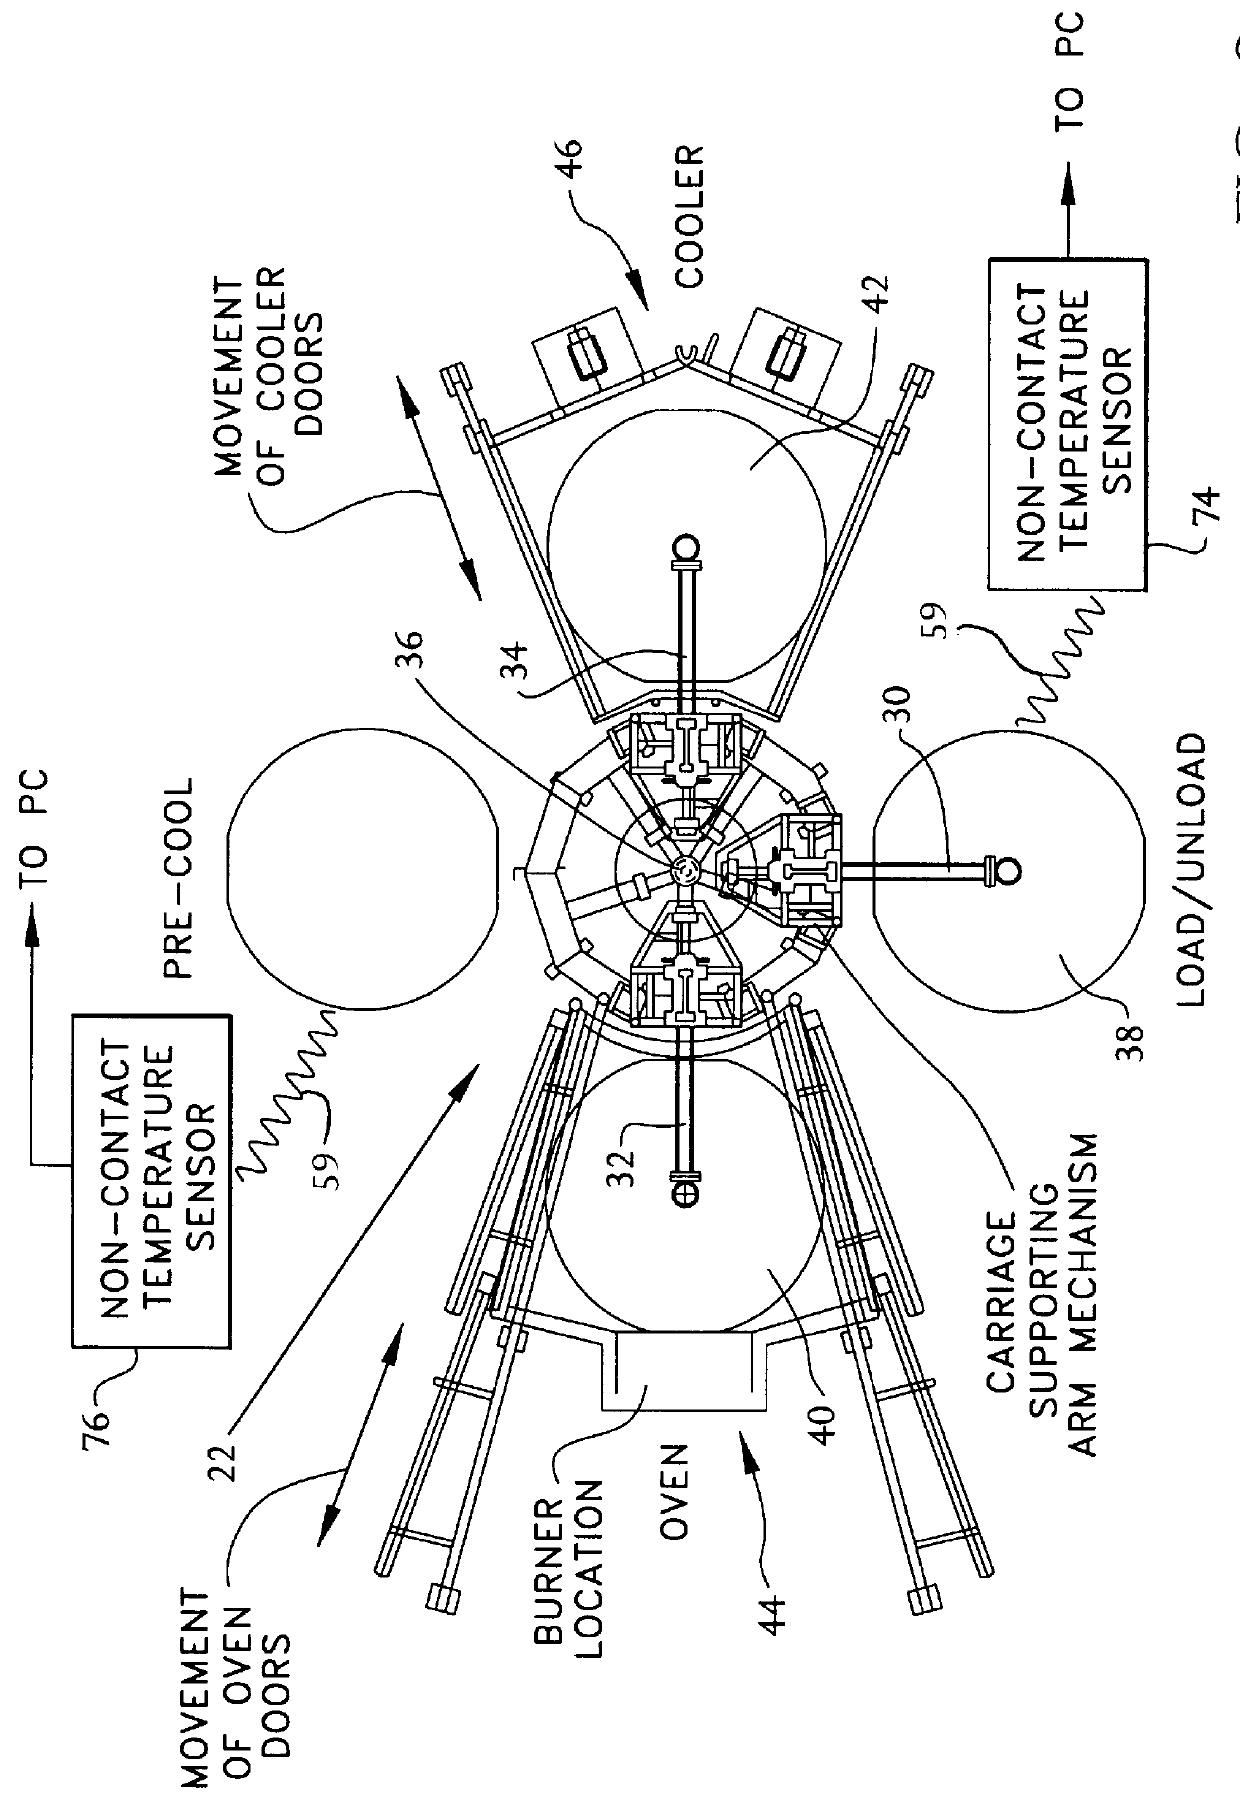 Rotational molding apparatus and method using infrared thermometry